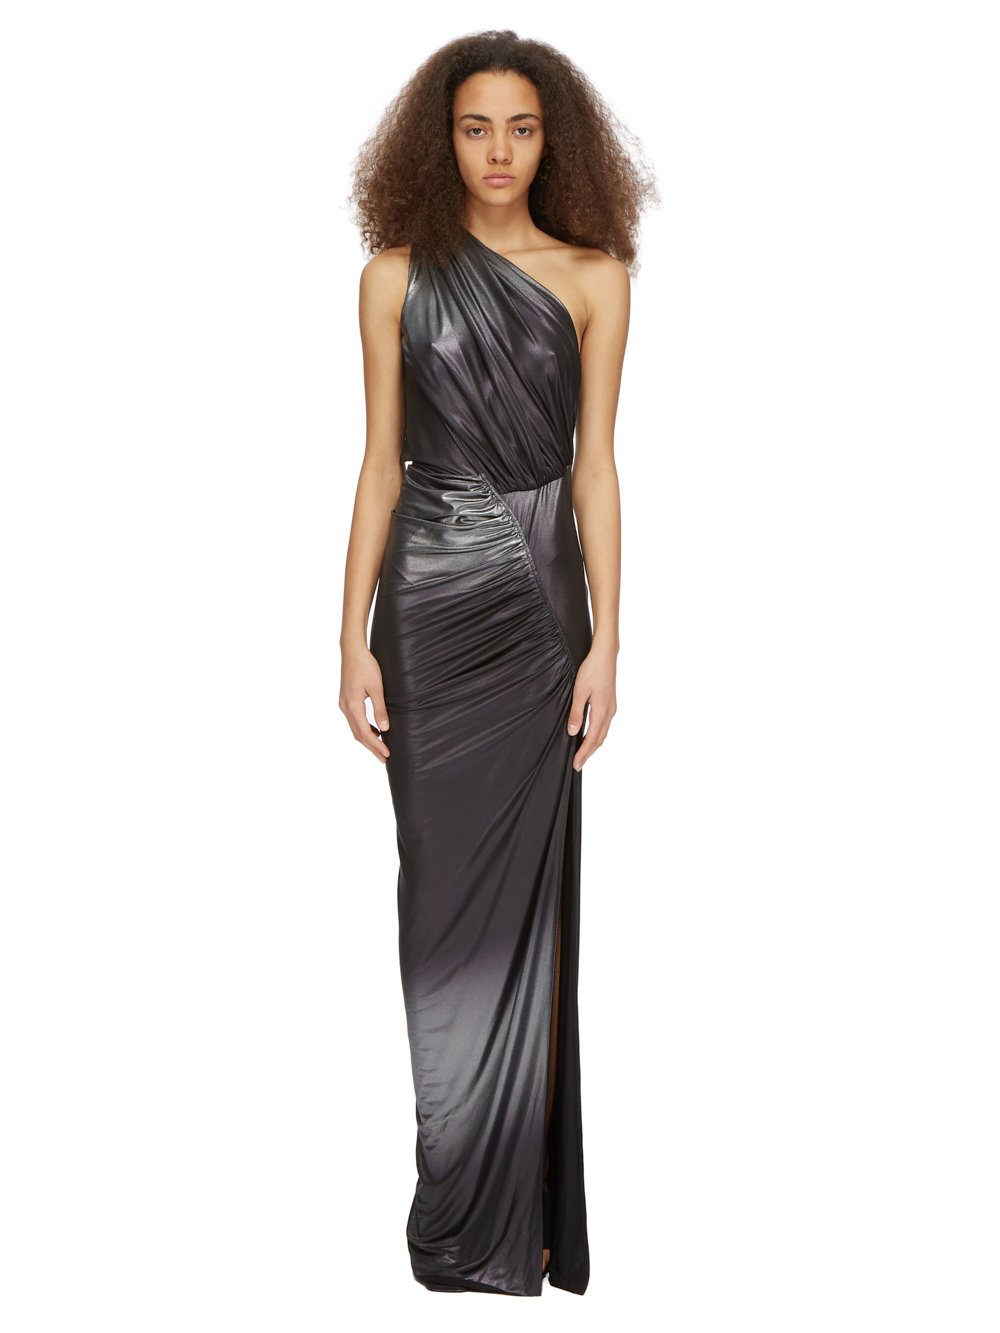 RICK OWENS LILIES FW23 LUXOR HERA GOWN IN SILVER DEGRADE GLOSSY VISCOSE JERSEY